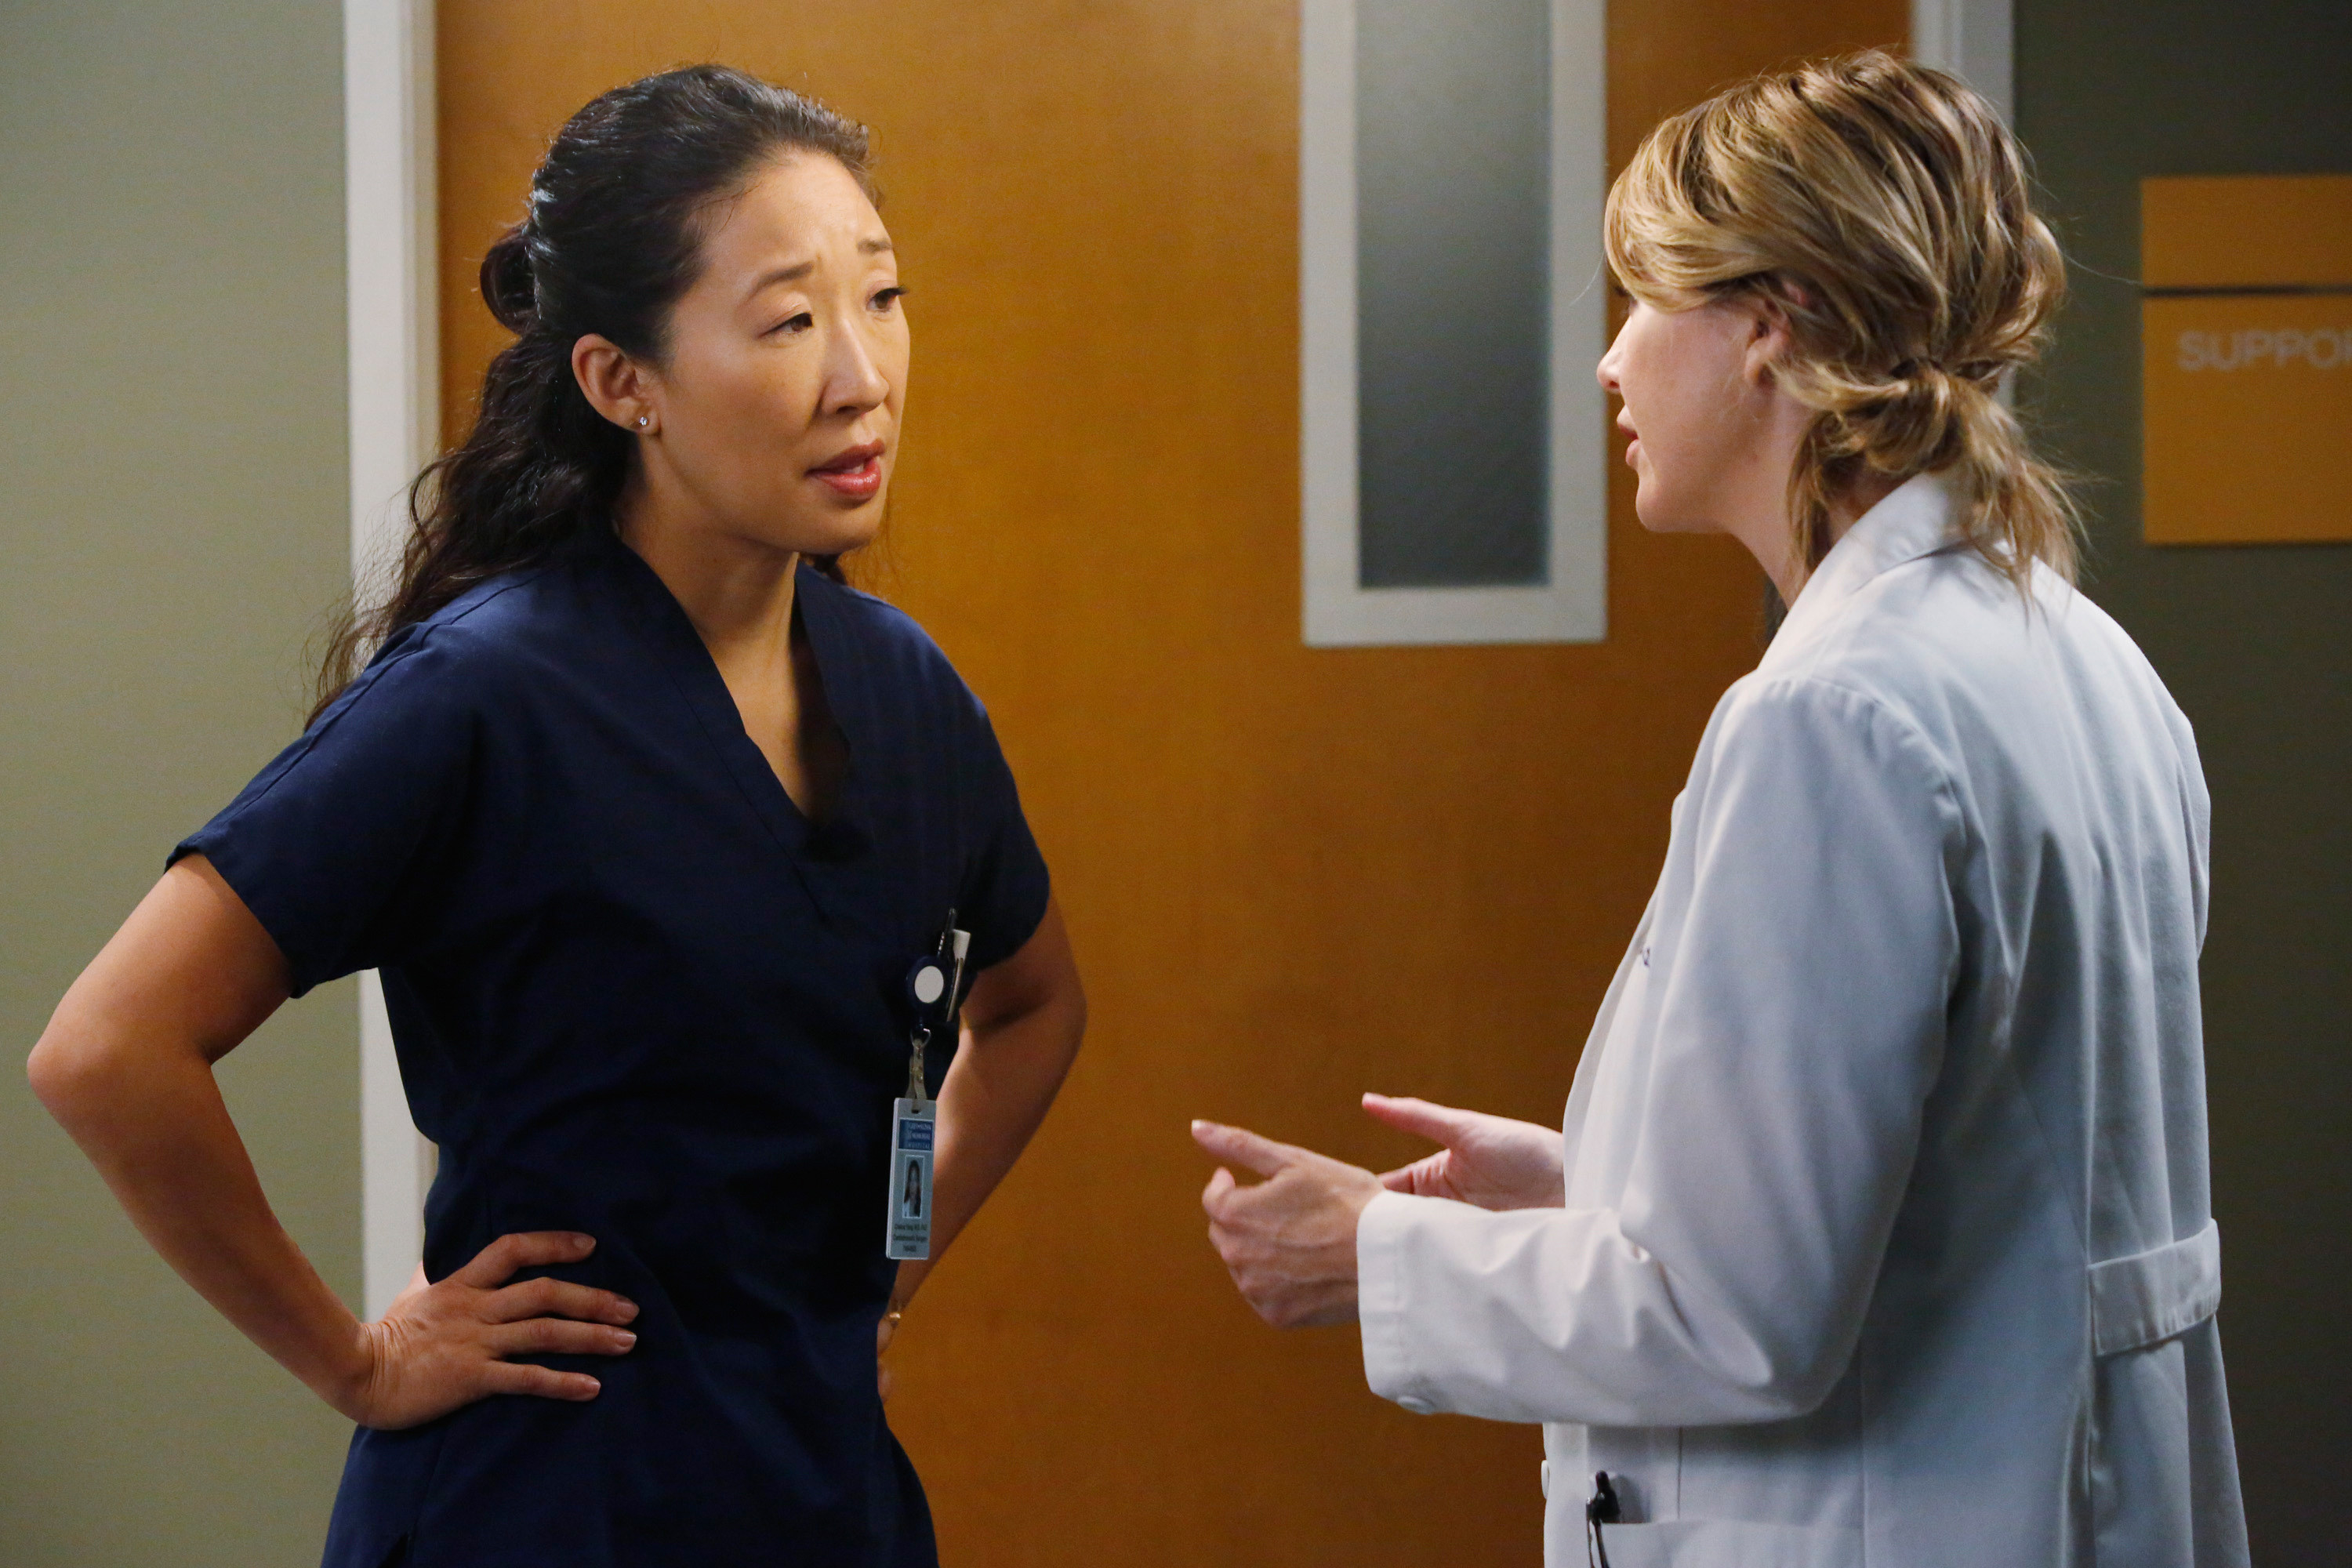 Cristina talks to another doctor